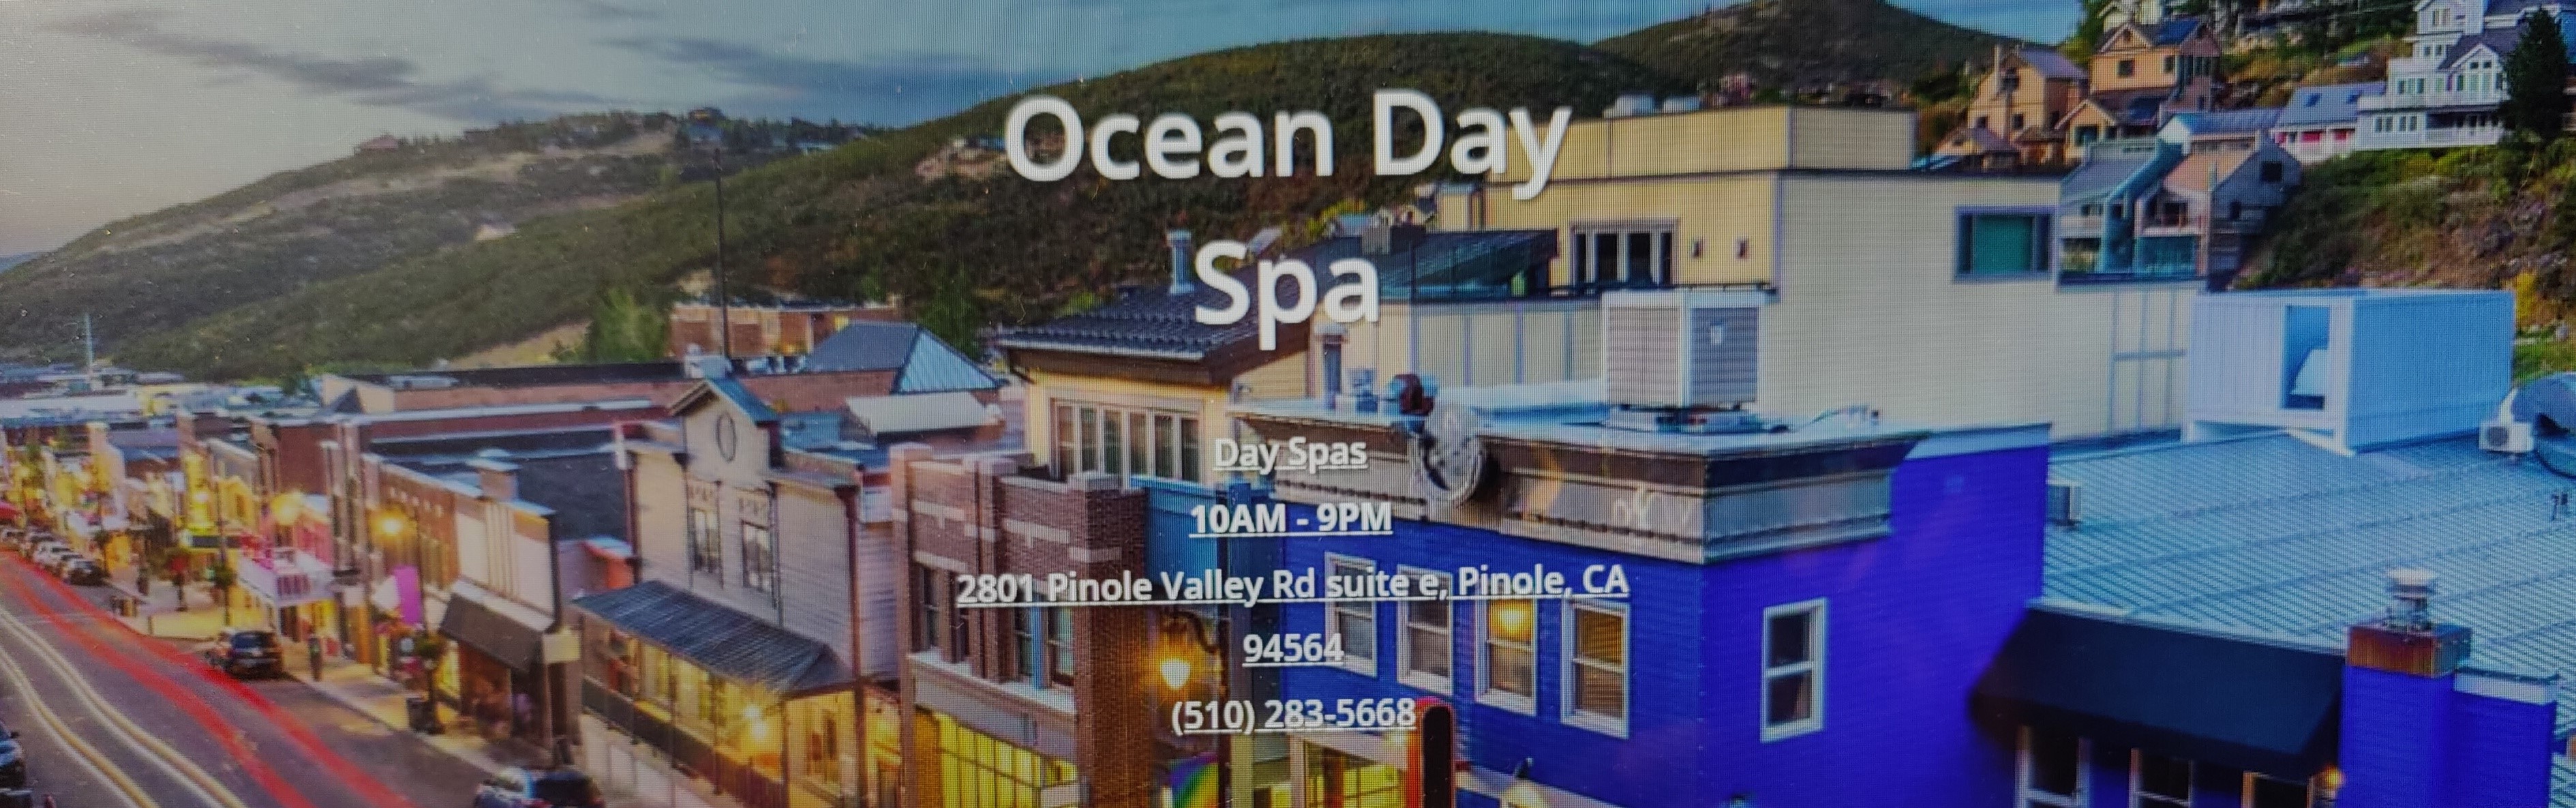 Ocean Day Spa Pinole | 2801 Pinole Valley Rd suite e, Pinole, CA 94564, United States | Phone: (151) 028-35668